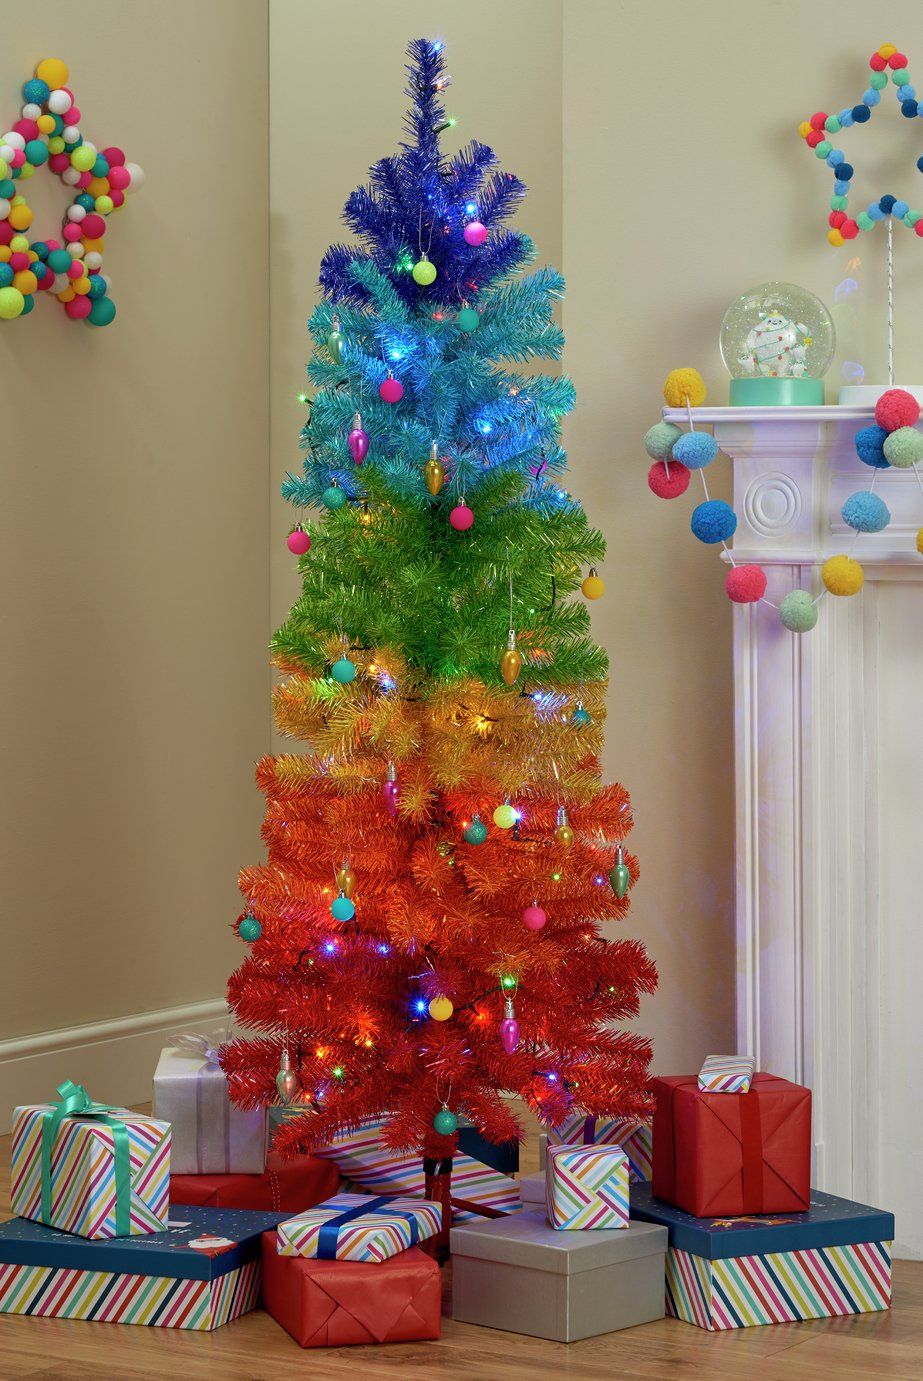 Rainbow Christmas Trees Are One Of 2019's Brightest Trends